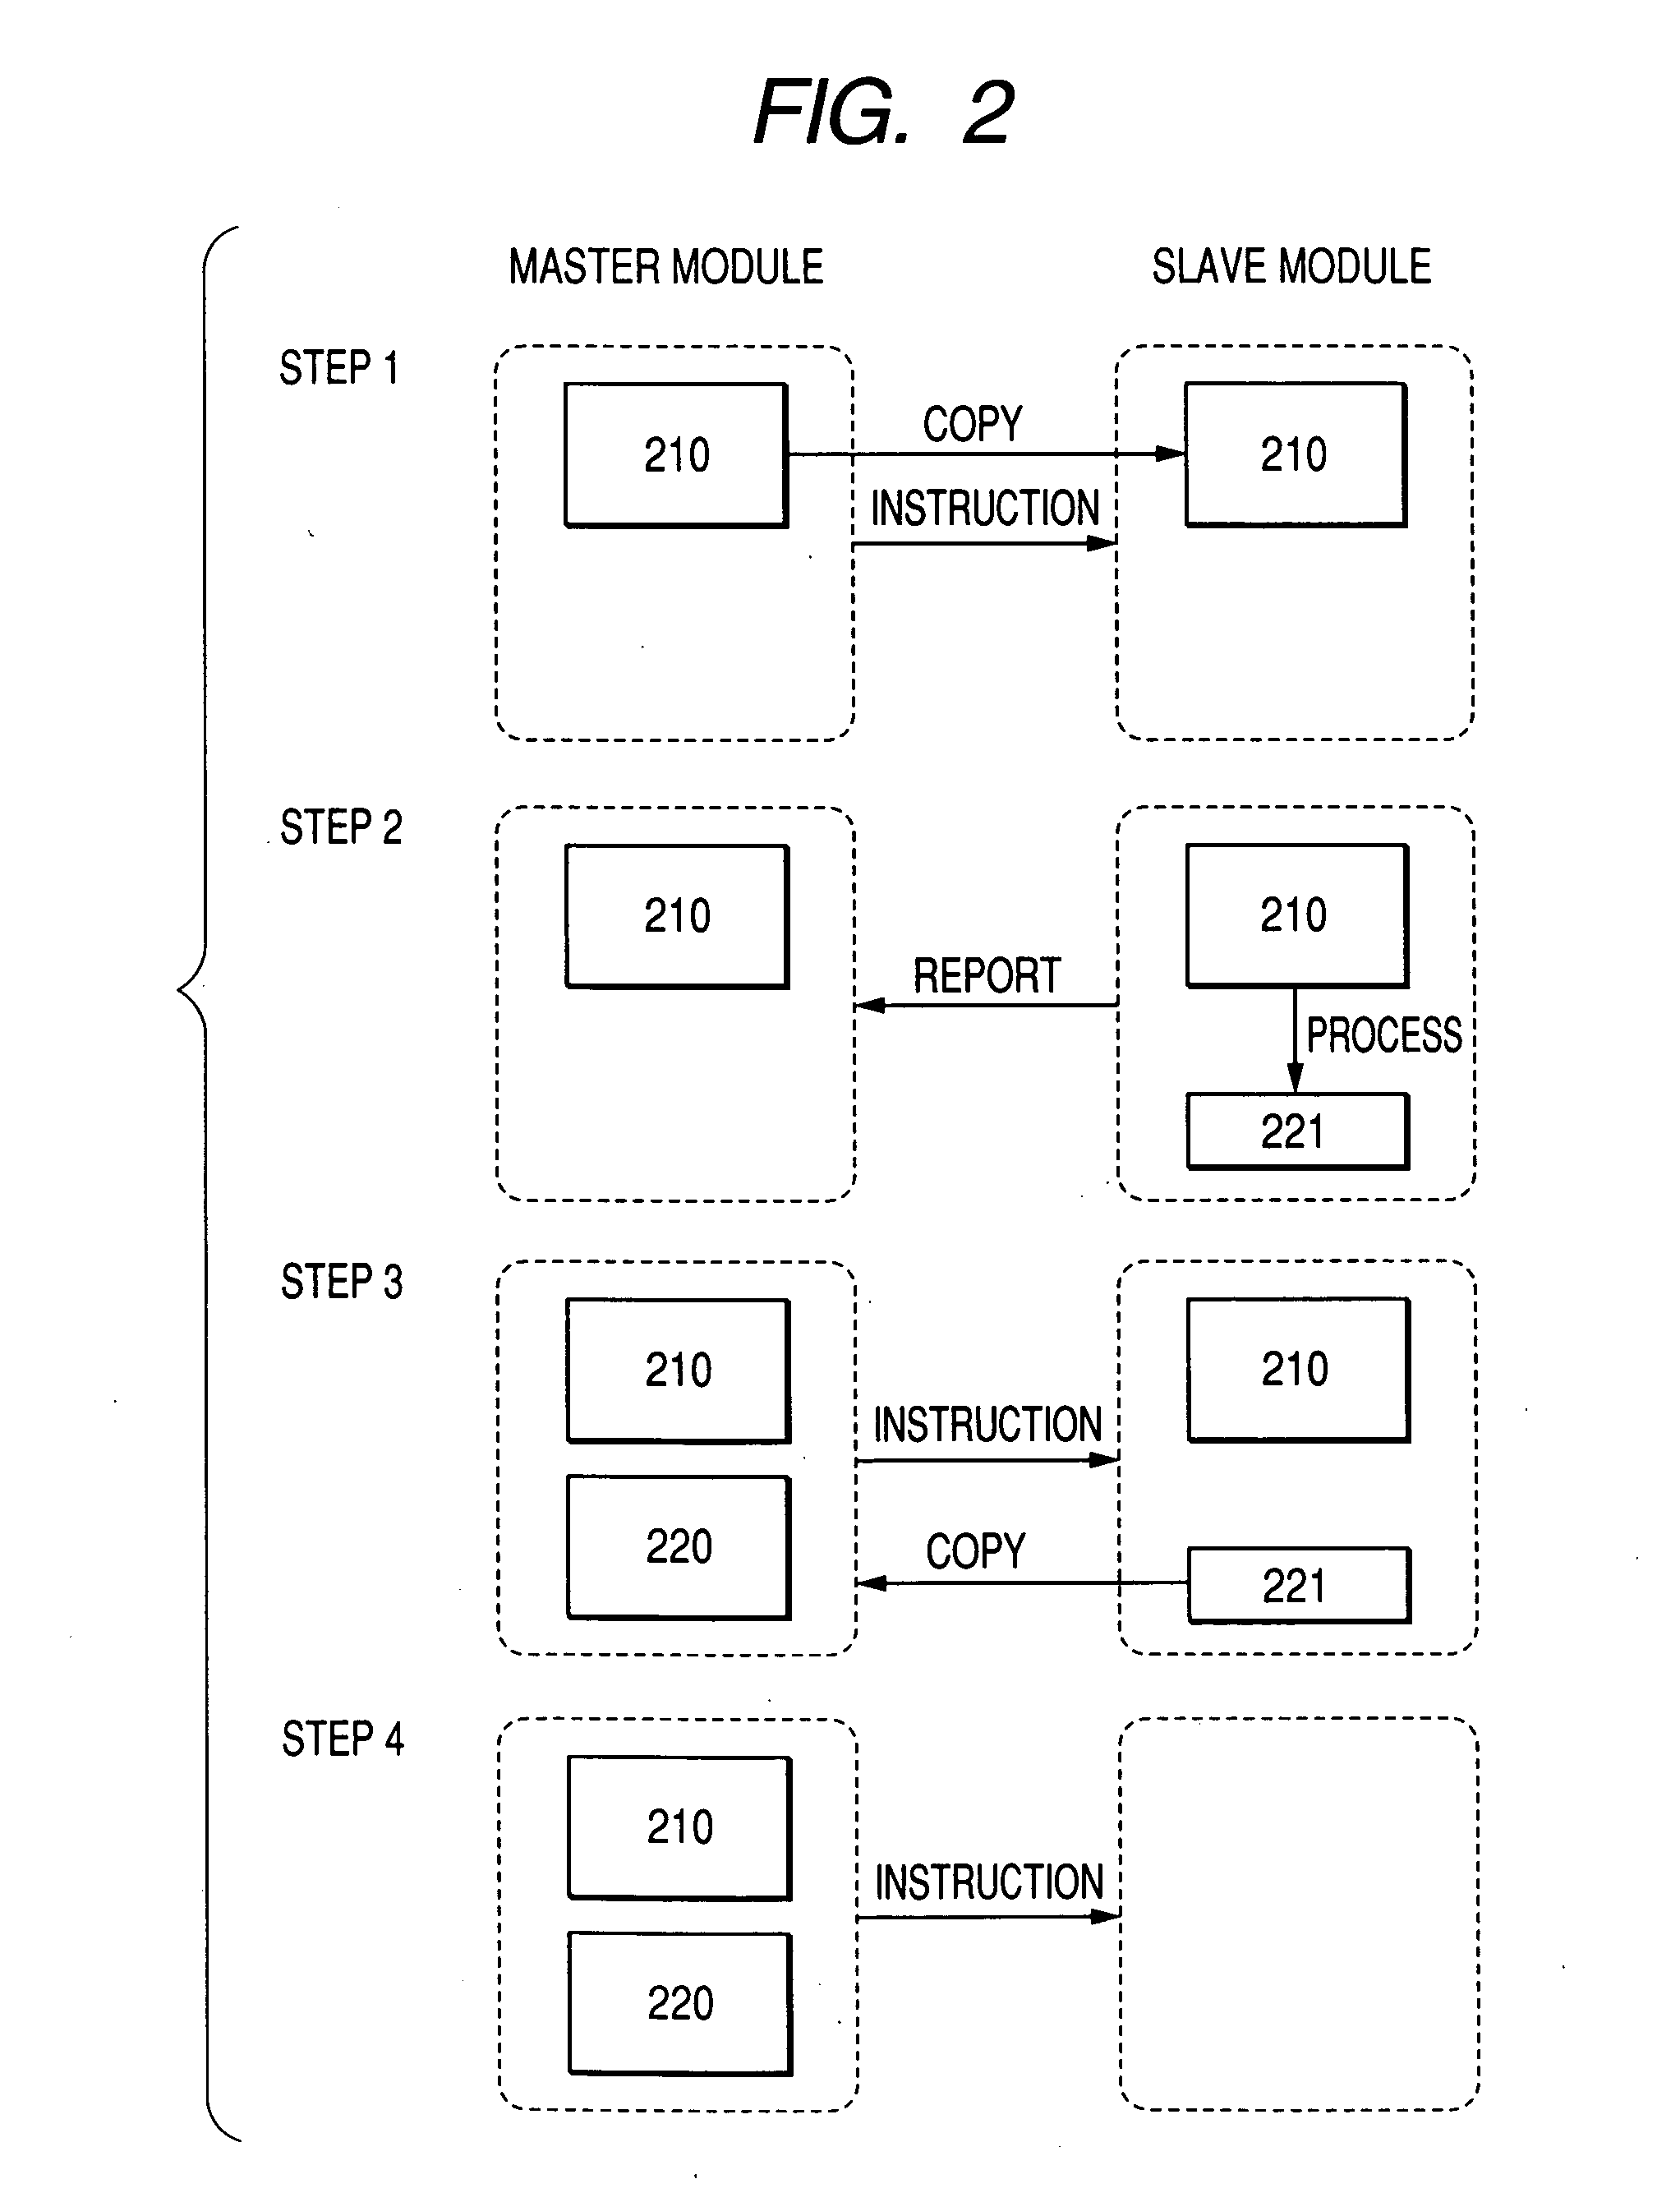 Cluster computer middleware, cluster computer simulator, cluster computer application, and application development supporting method